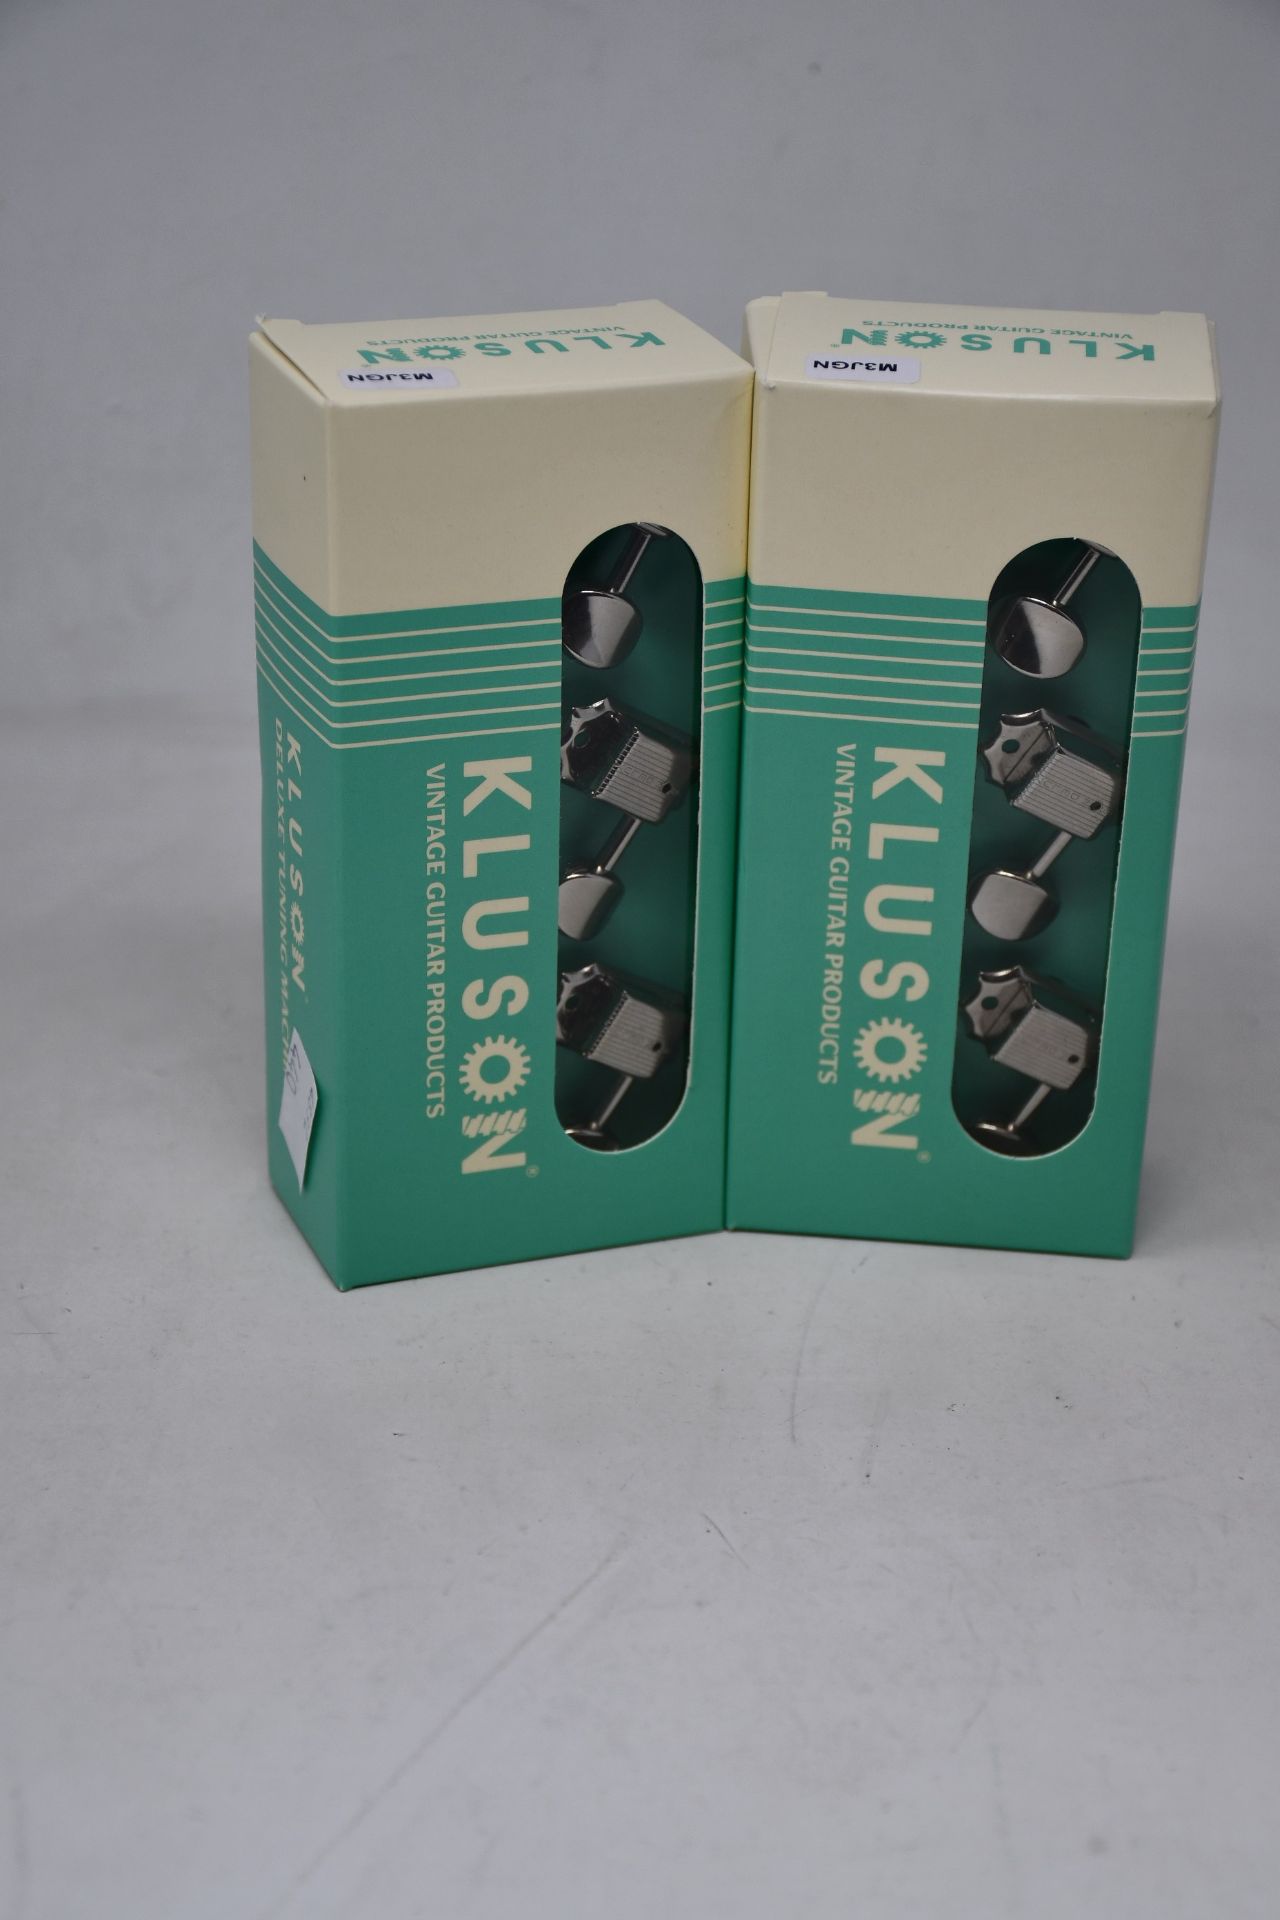 Six sets of boxed as new Kluson MS33C Guitar Tuners.